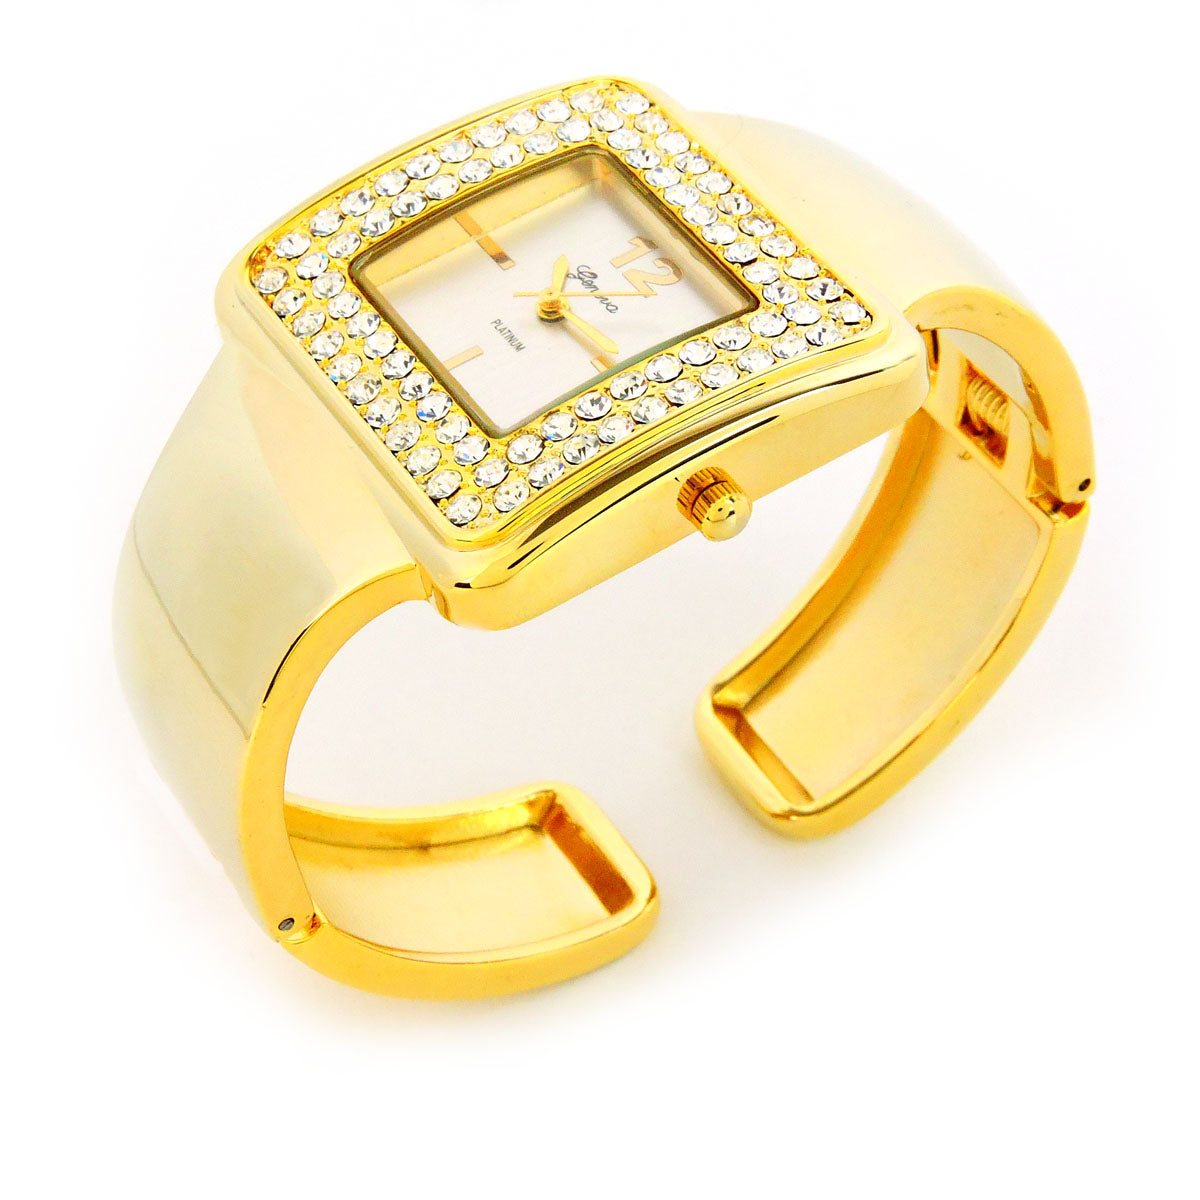 Gold Tone Crystal Bezel Luxury Bangle Cuff Watches for Women